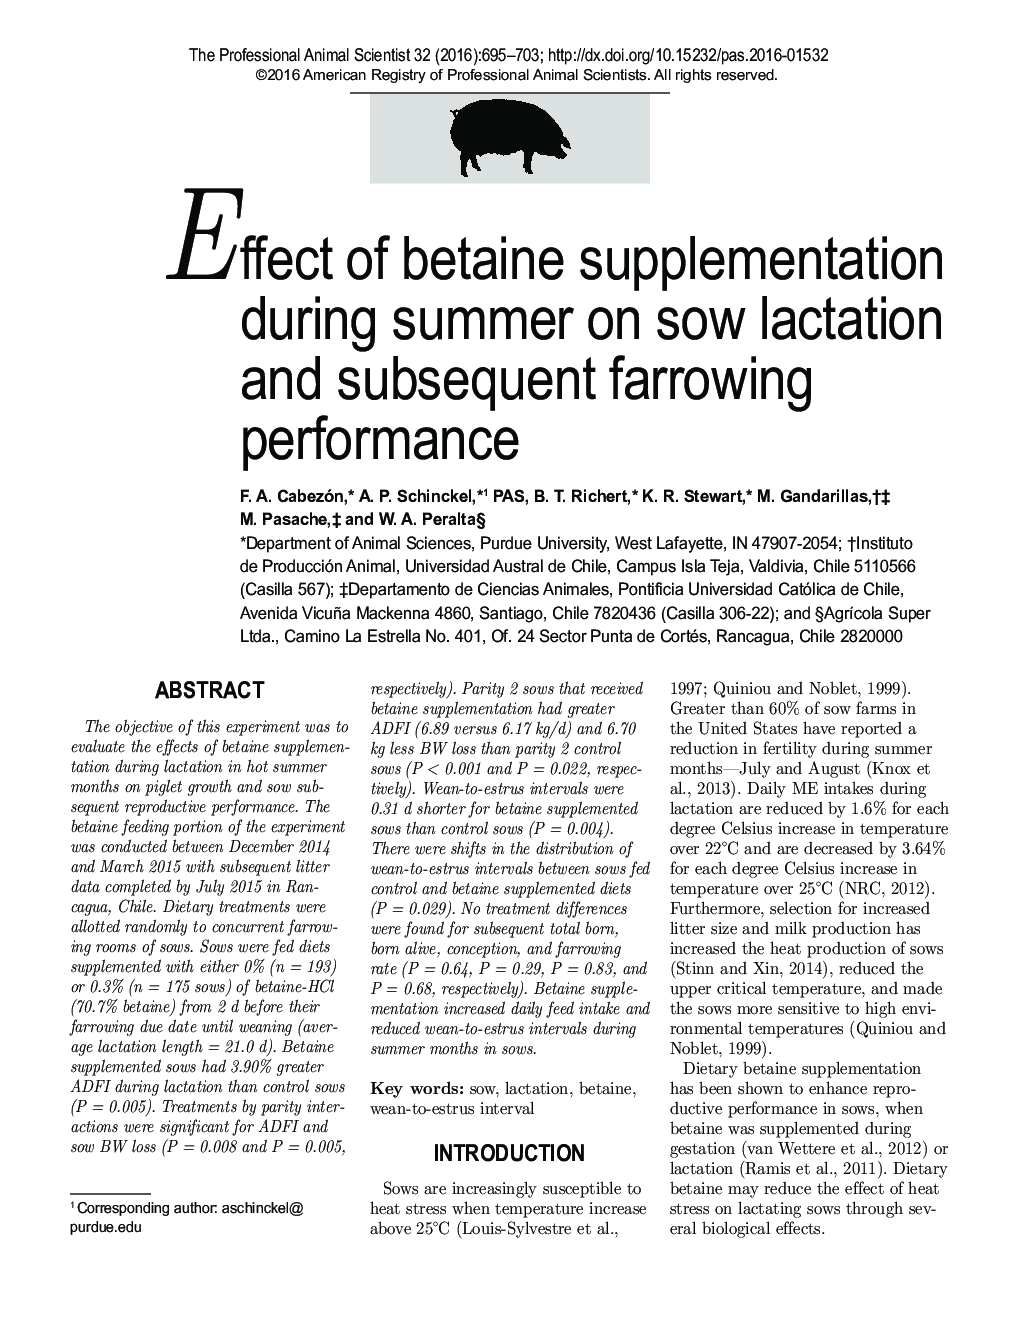 Effect of betaine supplementation during summer on sow lactation and subsequent farrowing performance